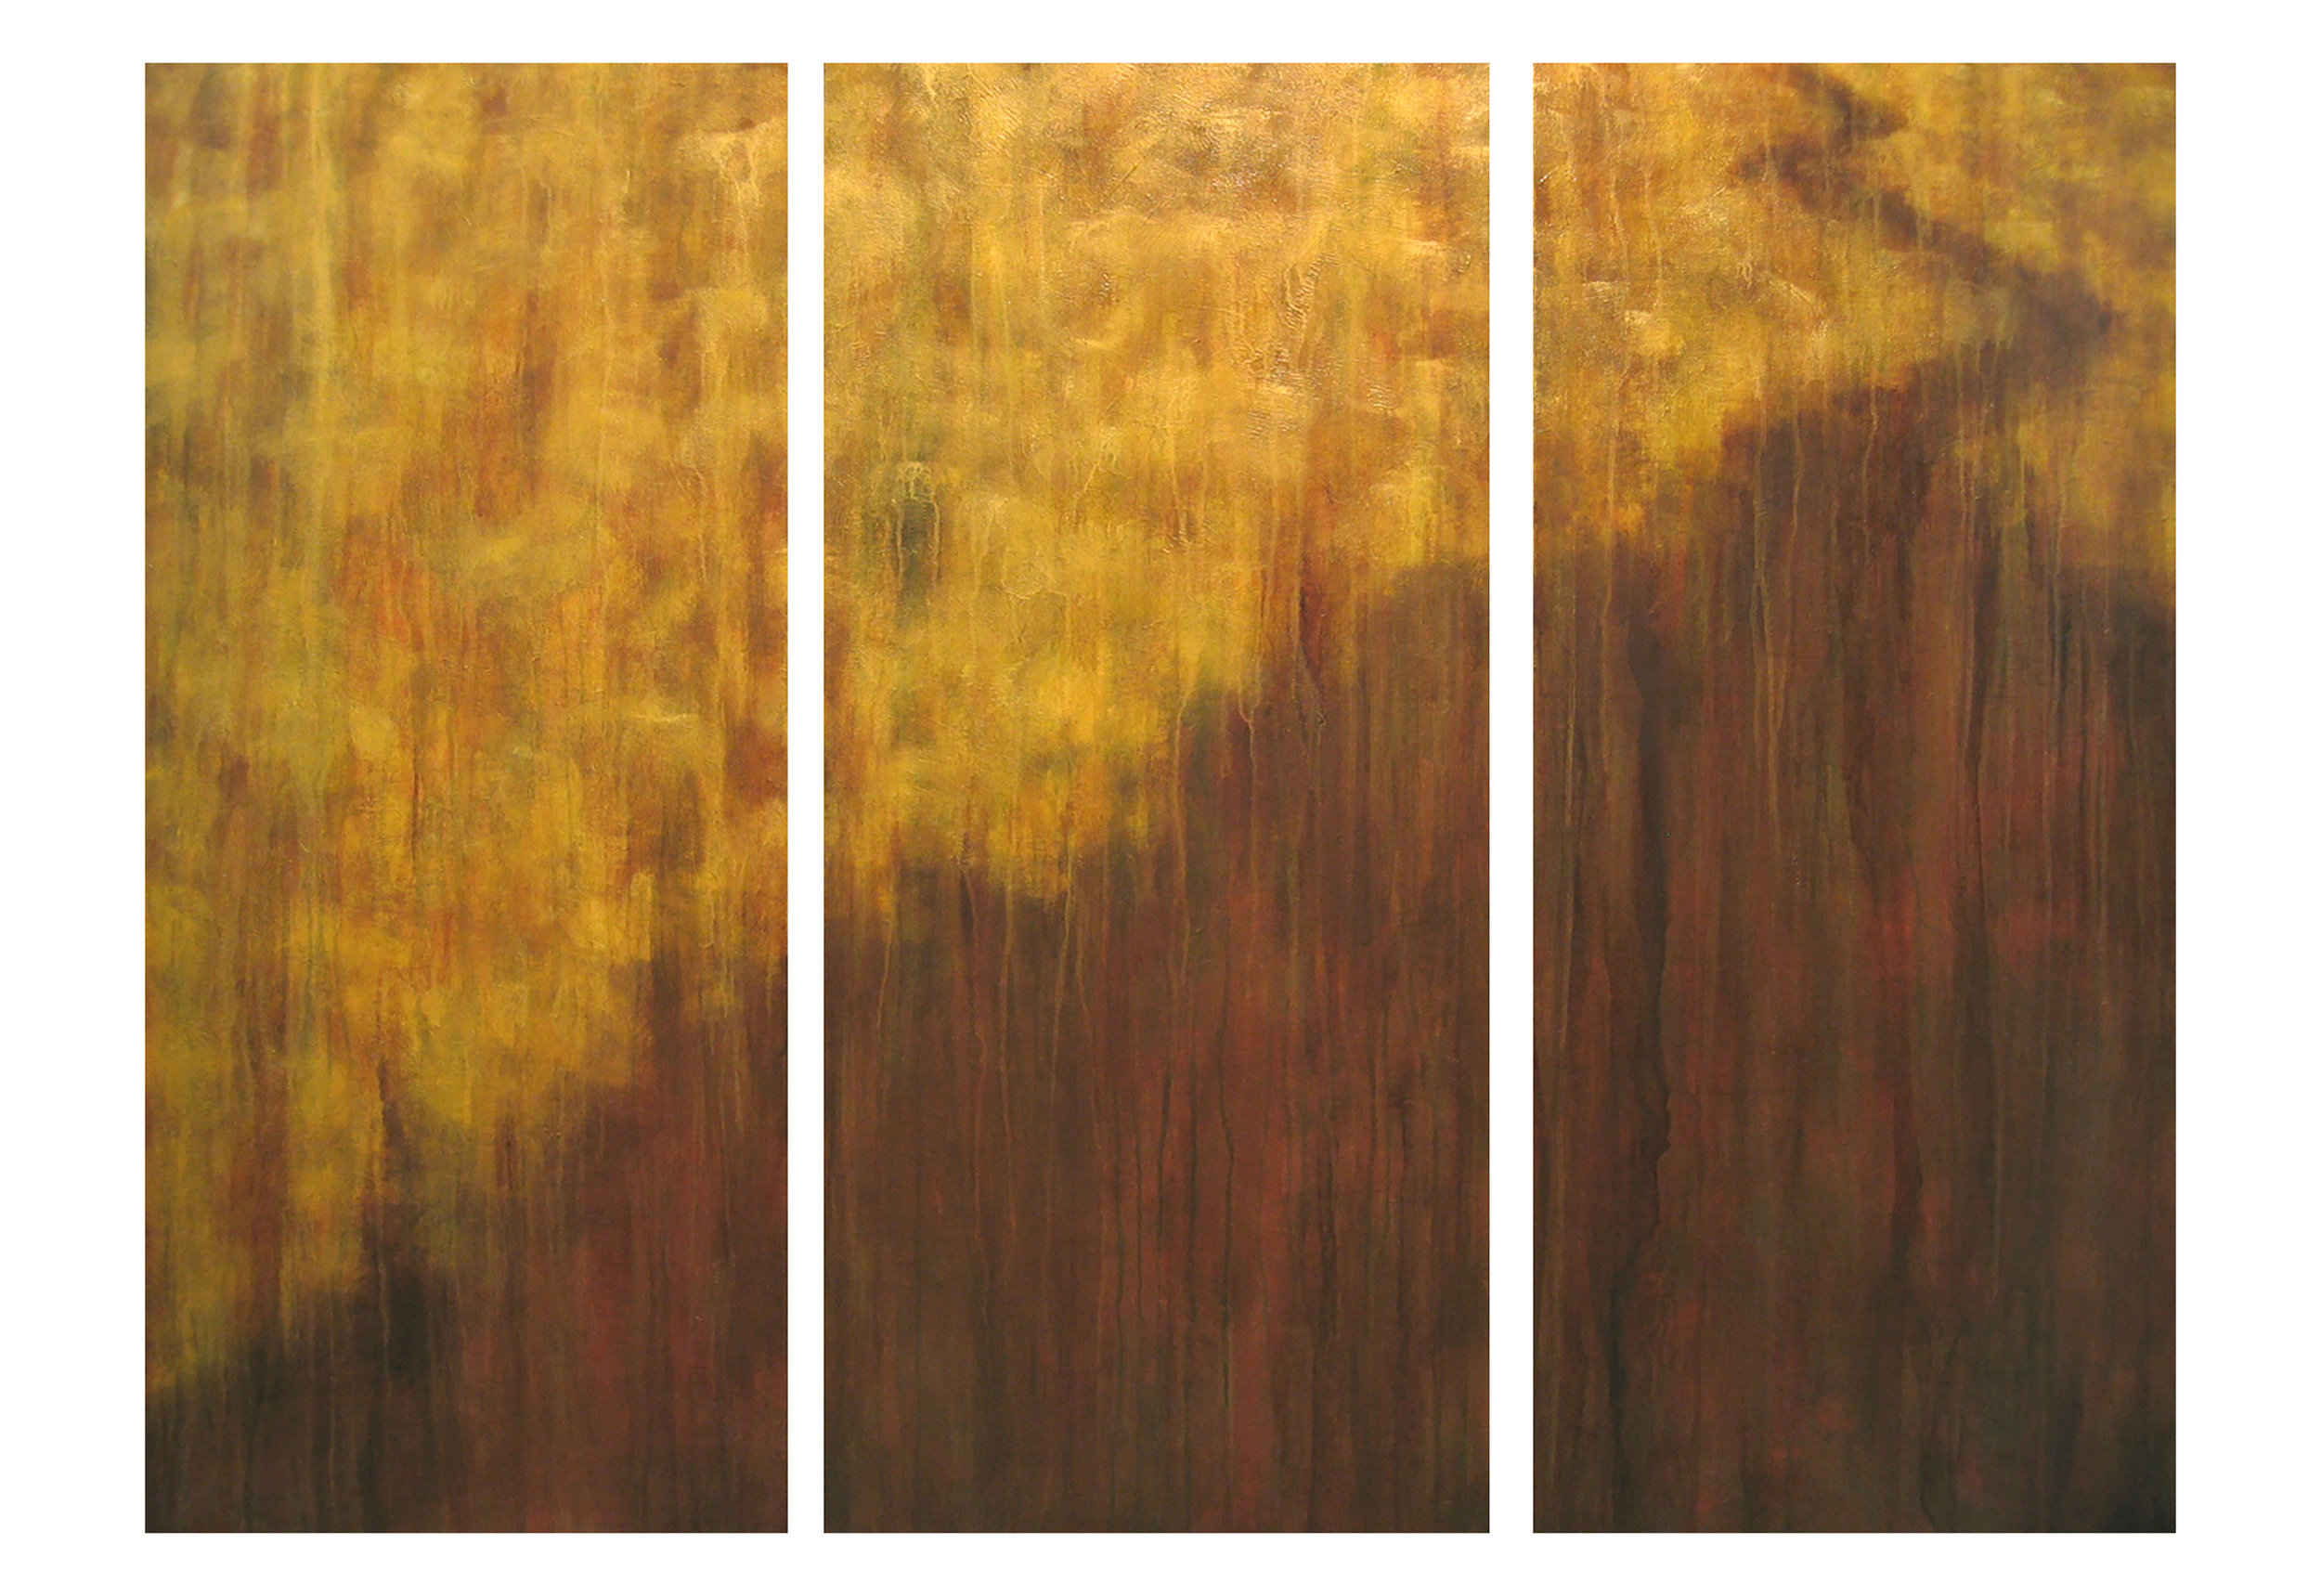  To See One's Way  3 panels, 52"h acrylic on hand-built canvas ©Karen Zilly  Site-specific commission for NYC client                          